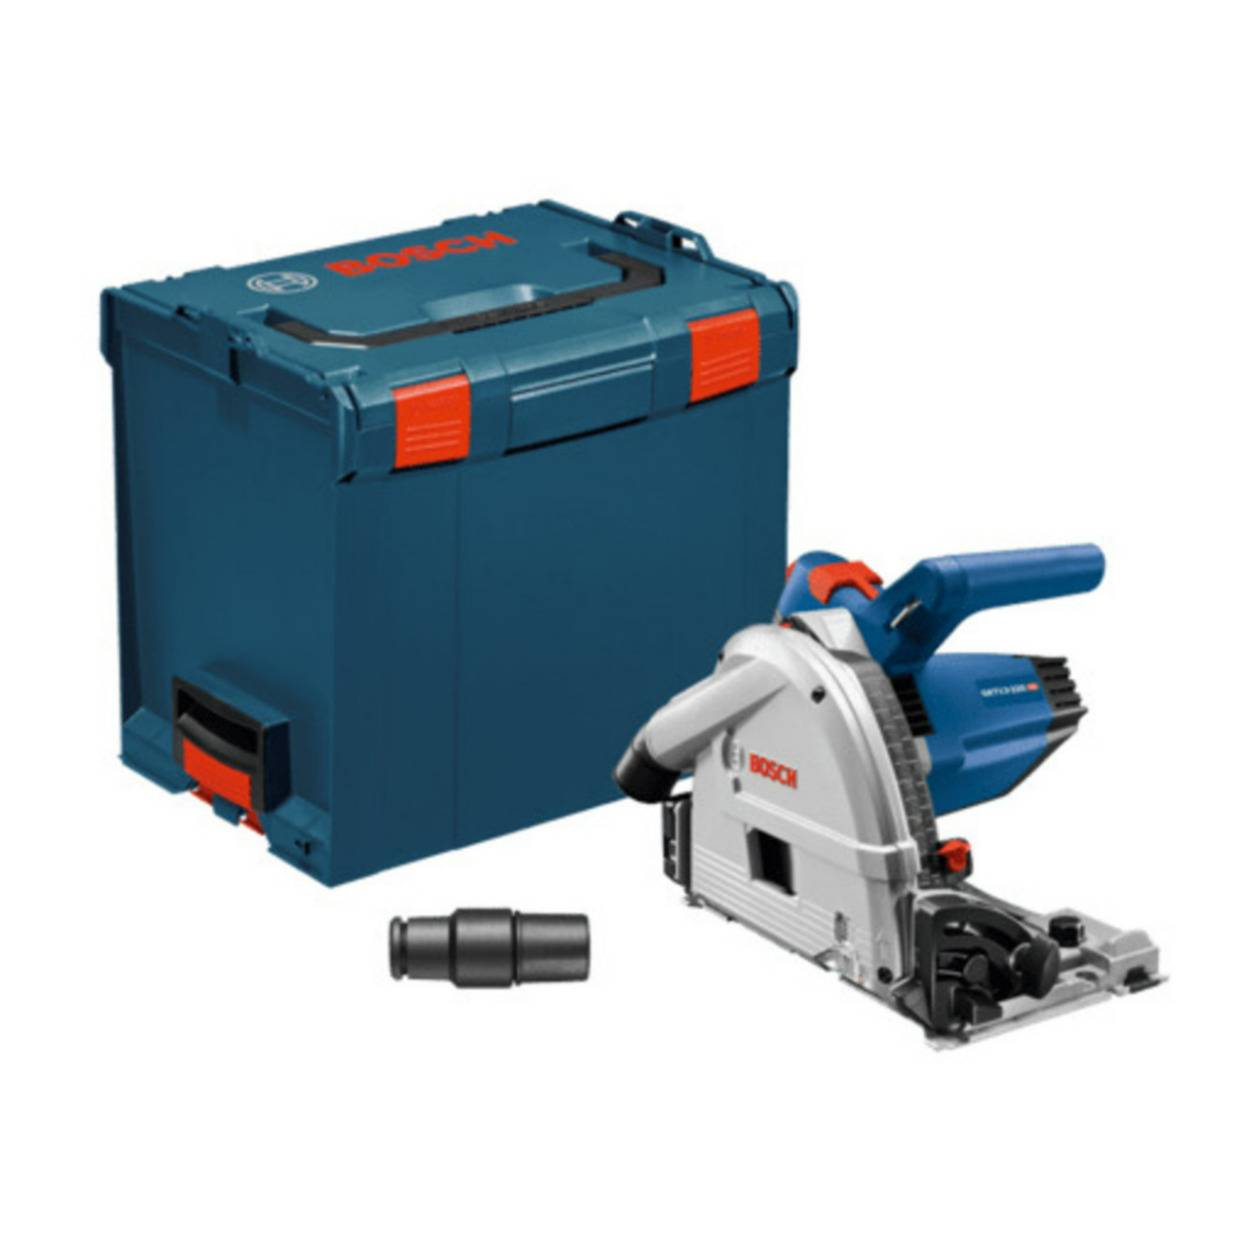 Bosch Tools 6-1/2 Inch Track Saw with Plunge Action and L-Boxx Carrying Case